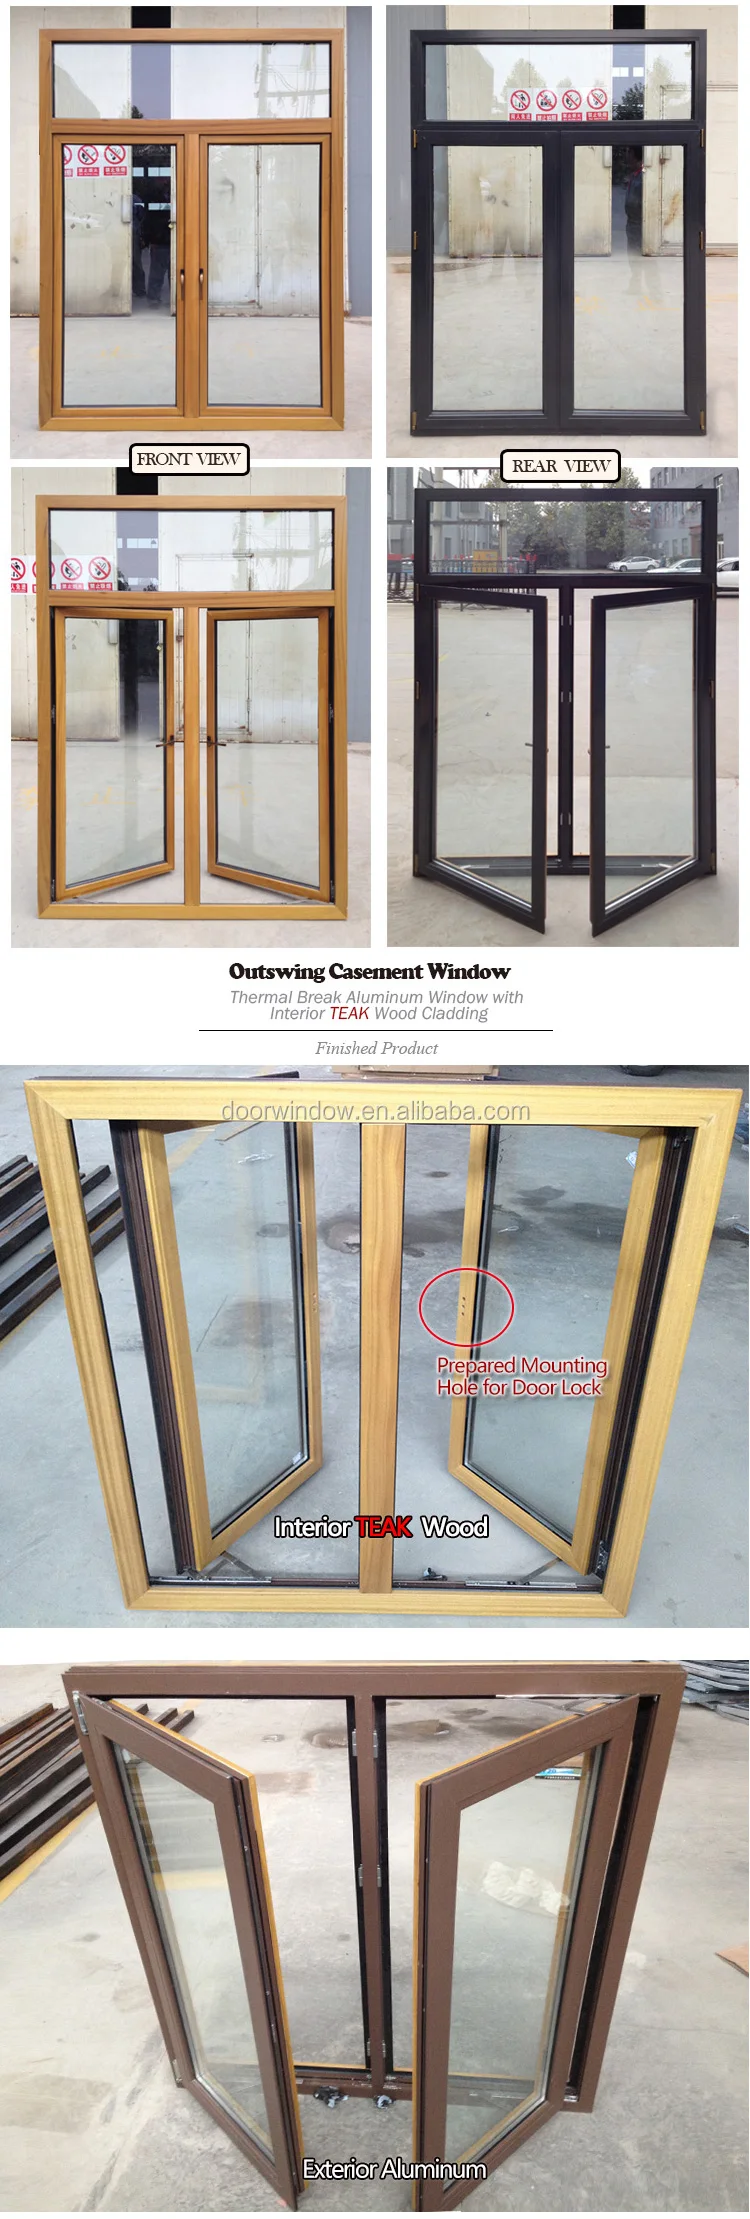 2020 Hot Sales French Double Sashes with Wood Frame and Tempered Glass House Windows